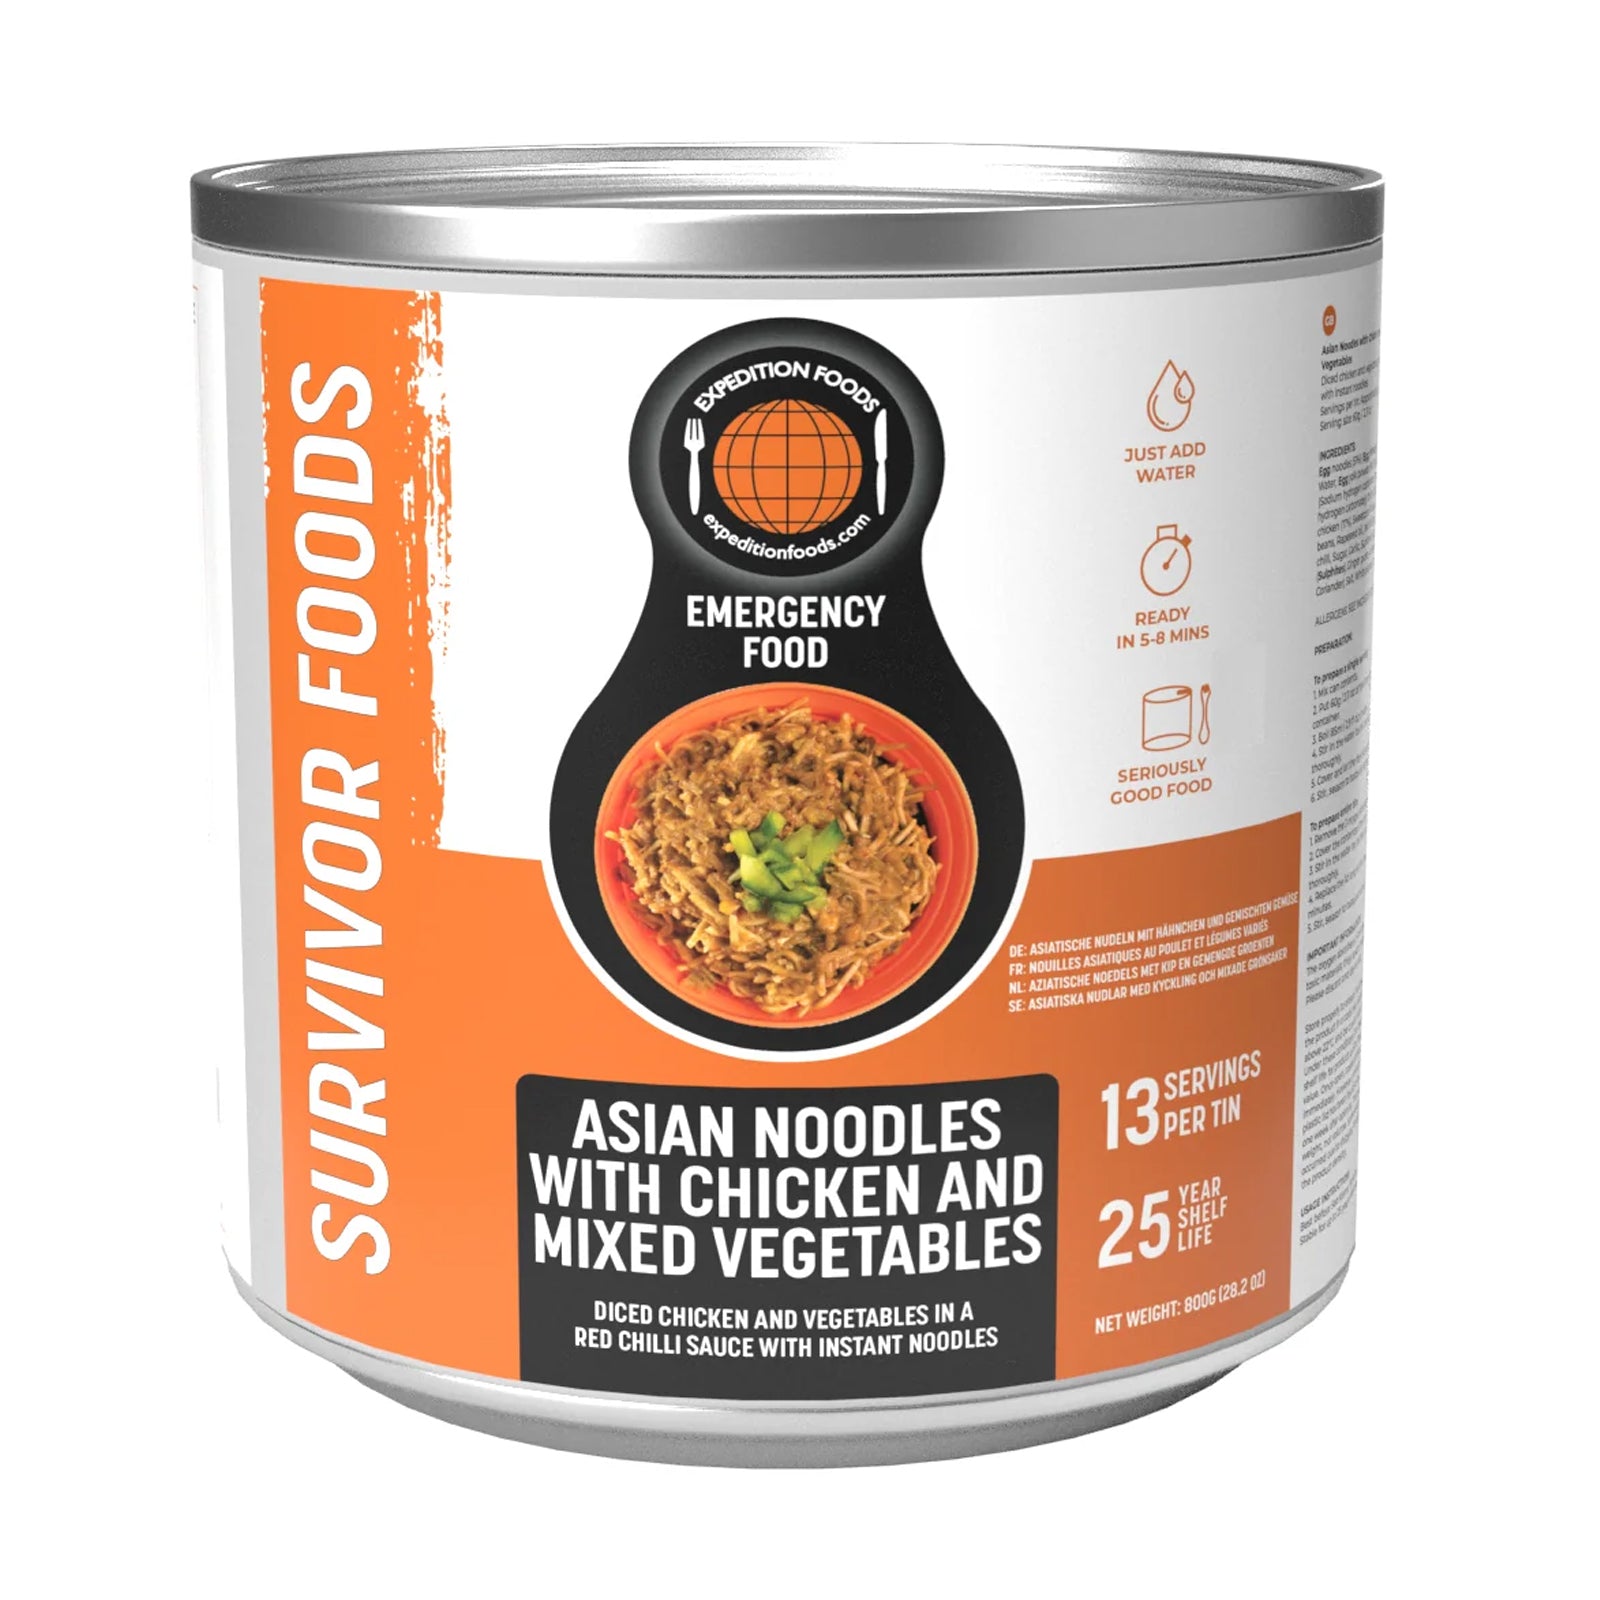 Expedition Foods Asian Noodles with Chicken & Veg in Tin